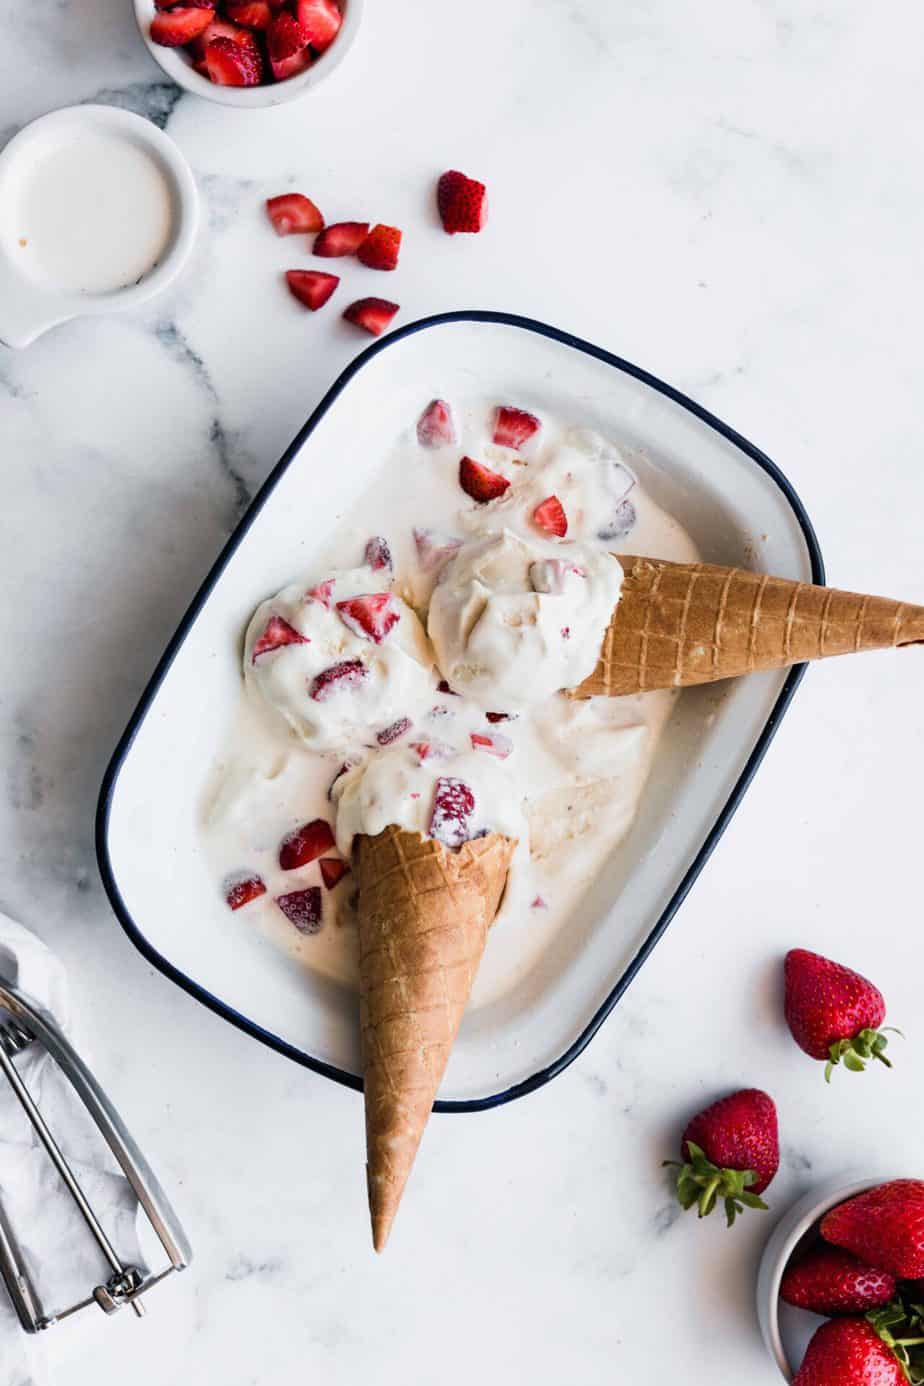 What could possibly be better than the combination of ice cream and cheesecake? This incredibly easy homemade Strawberry Cheesecake Ice Cream recipe uses only a few ingredients and makes the most delicious and creamy ice cream ever. 